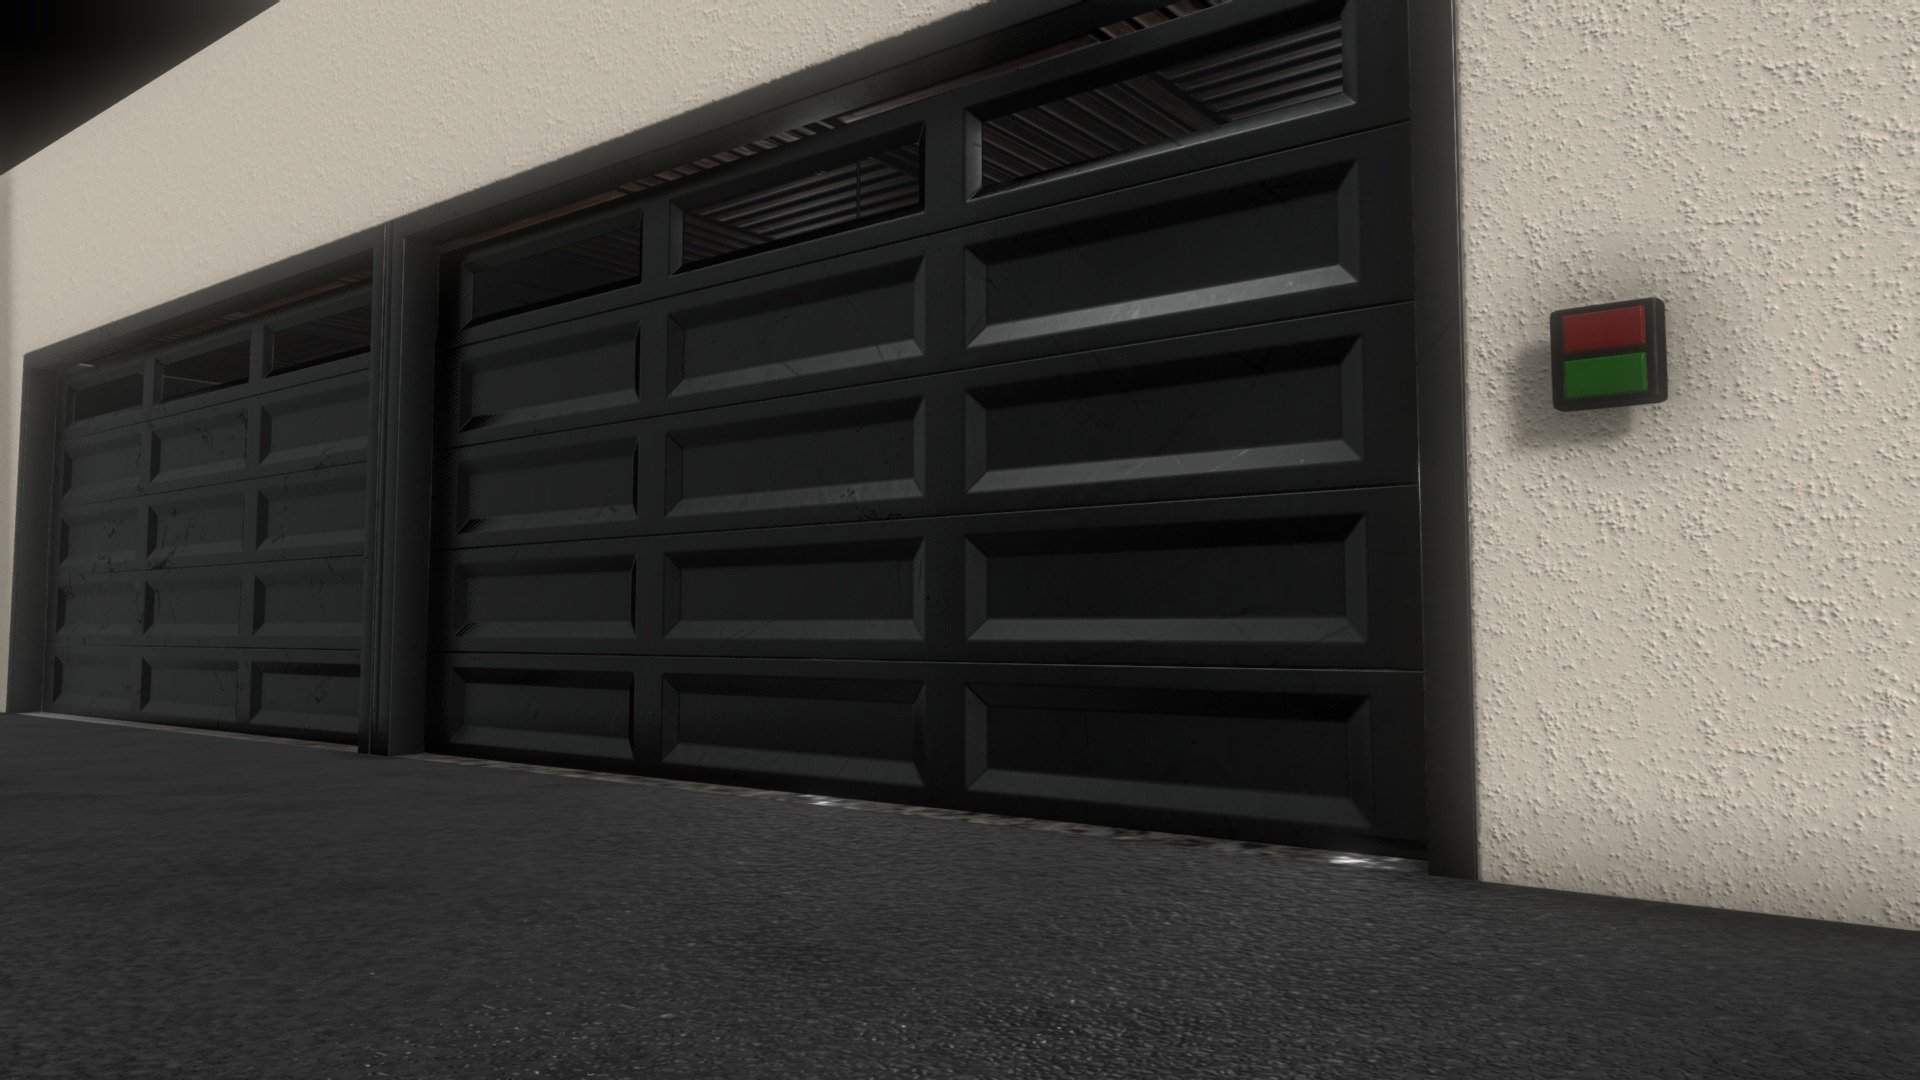 Modelled in Blender with textures from 3DTextures website. Garage door animated at 25 fps.

texture source : 3dtextures.me - Garage - 3D model by dzakizd2019 3d model